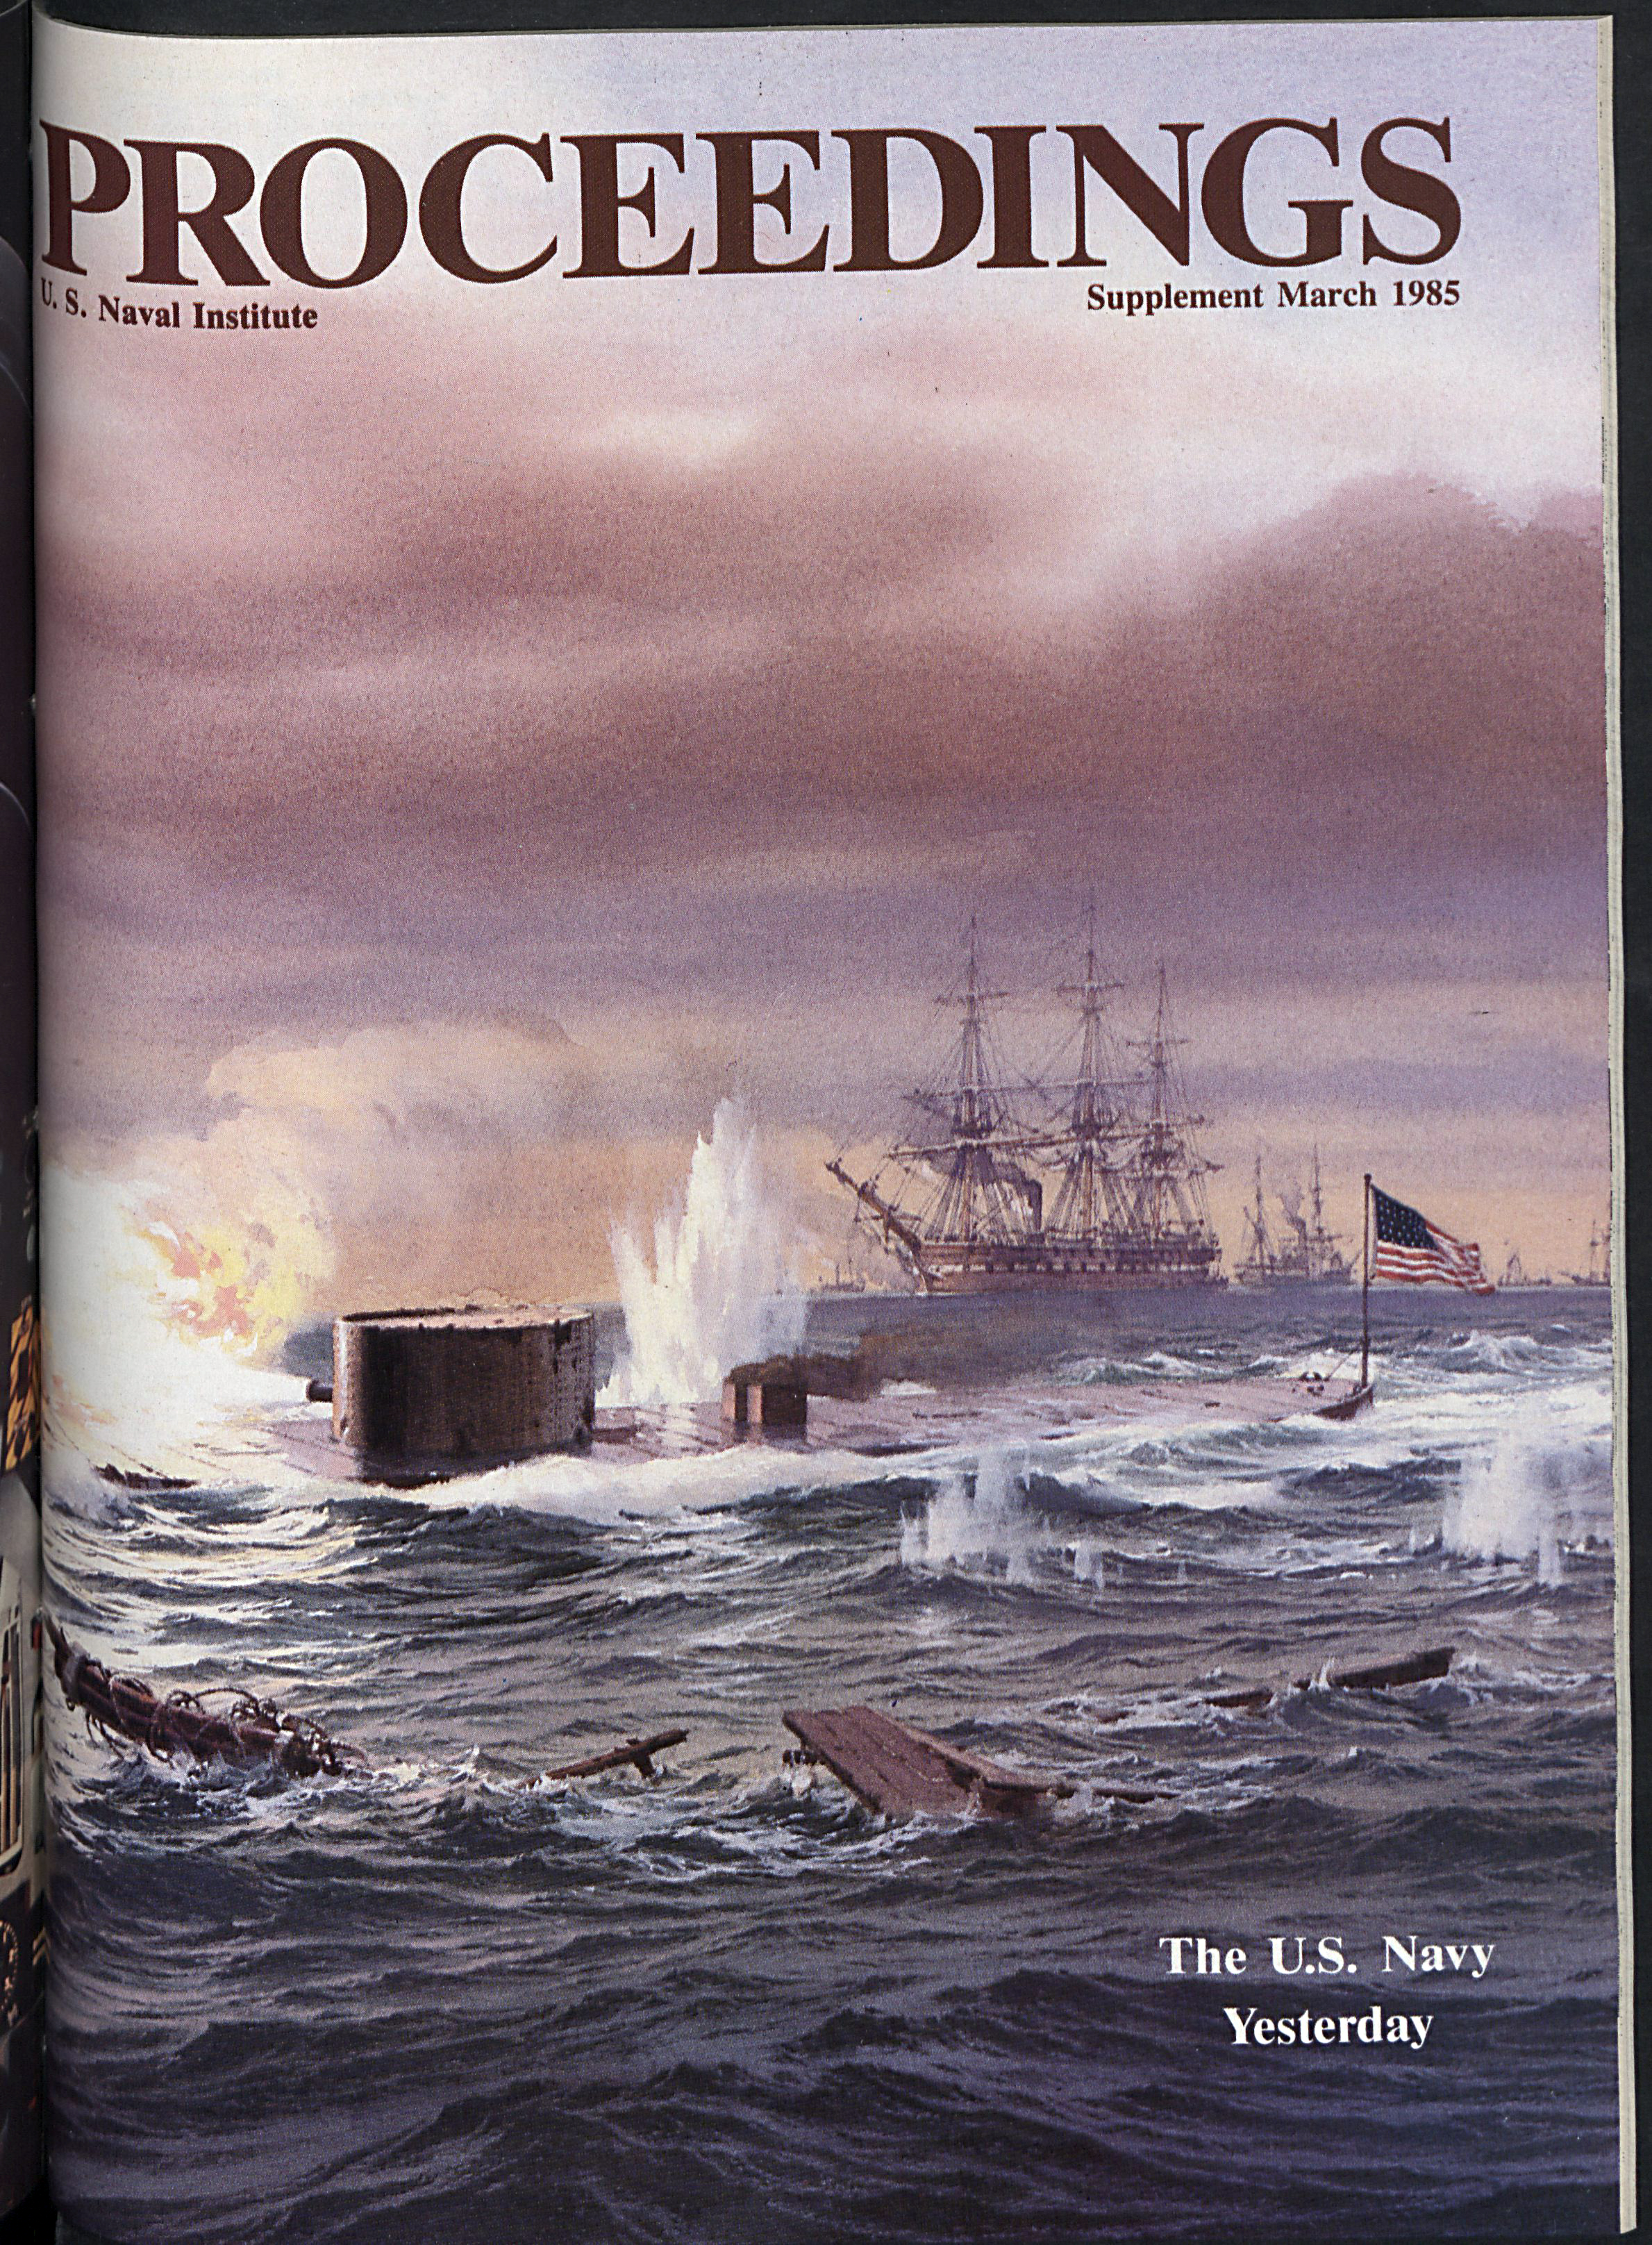 Proceedings - March 1985 Vol. 111/3/985 The U.S. Navy Yesterday Supplement Cover